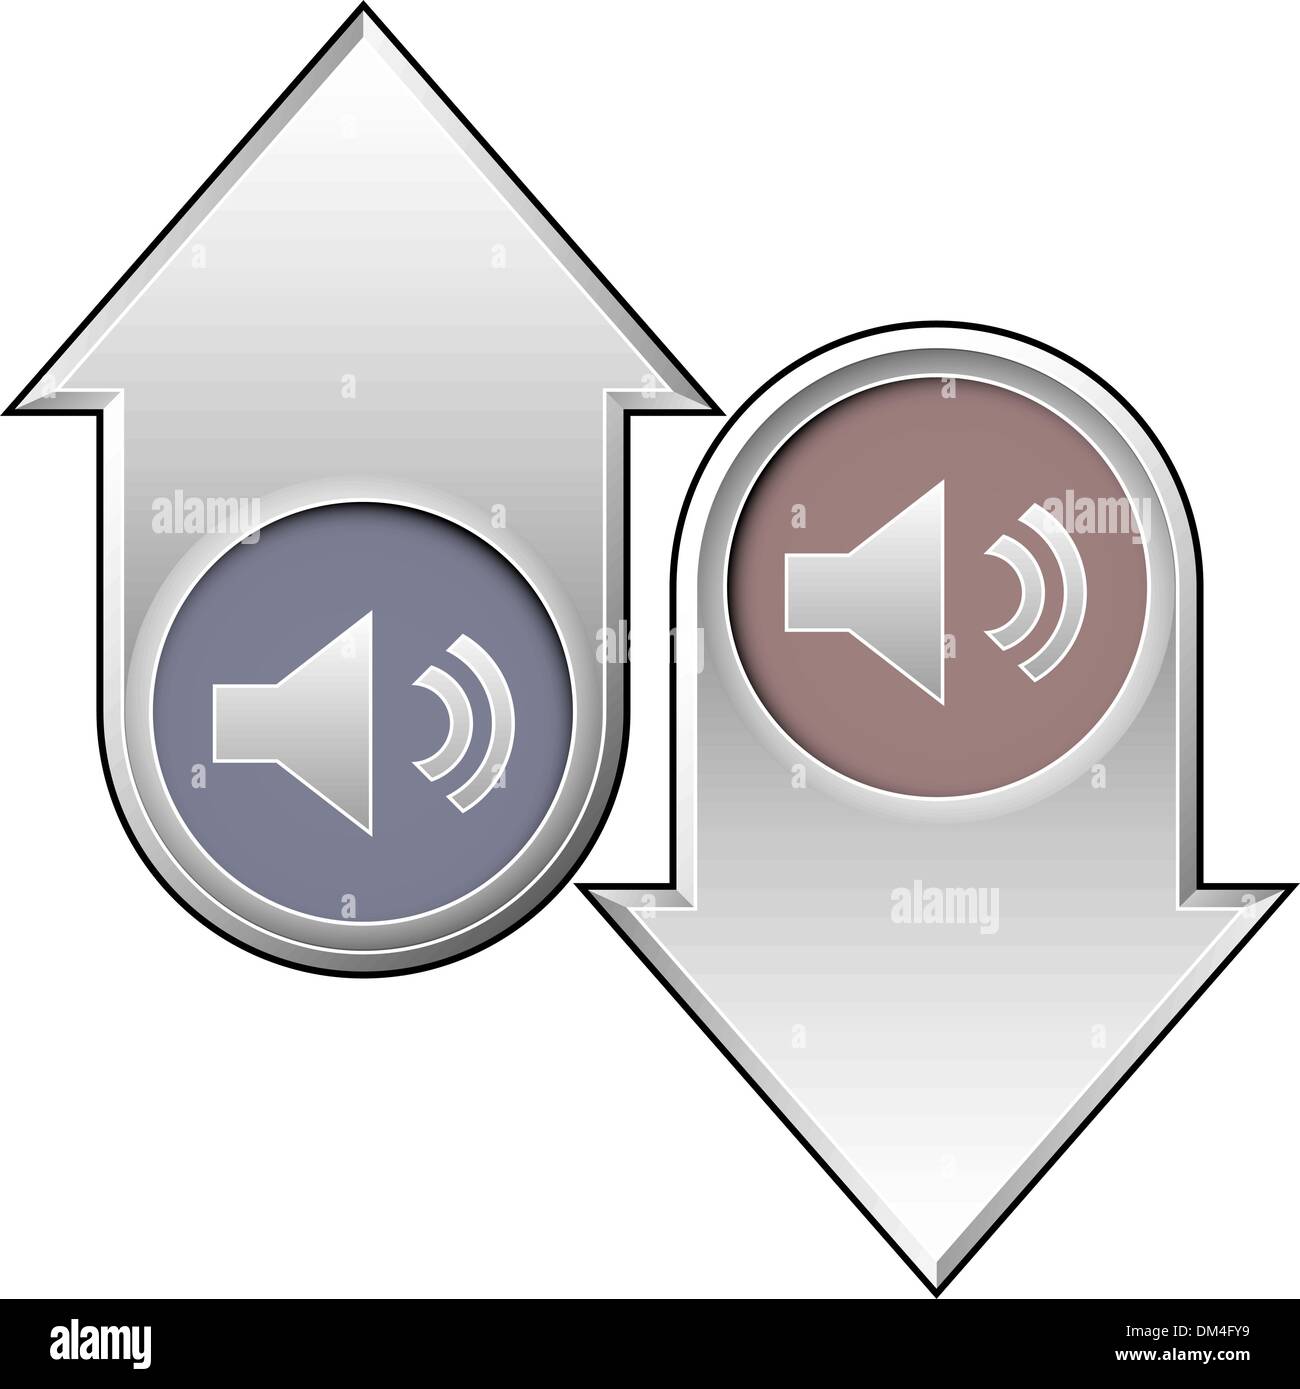 Volume or mute icon on up and down arrows Stock Vector